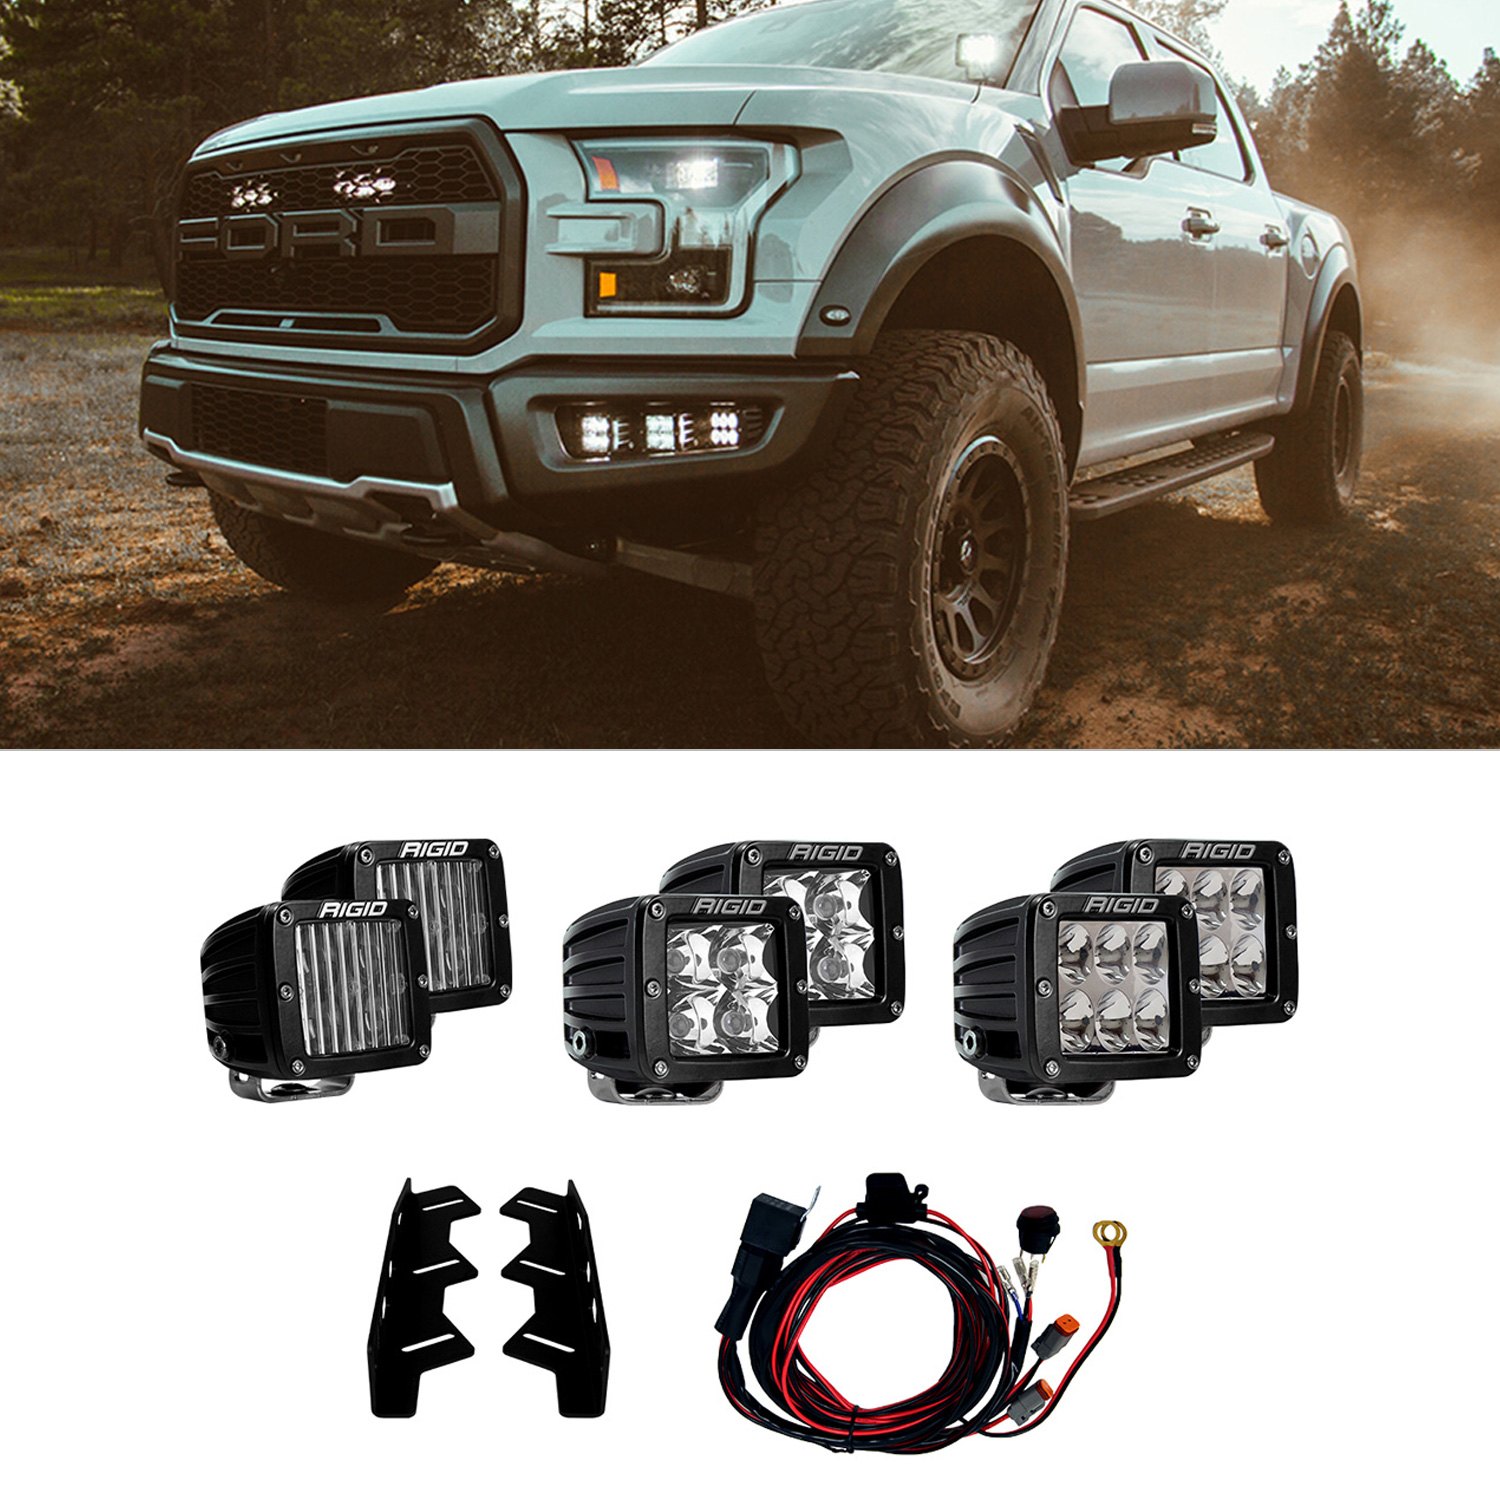 Rigid Industries 41610 2017-2018 Ford Raptor Fog Light Kit Includes Mounts and 6 D-Series 